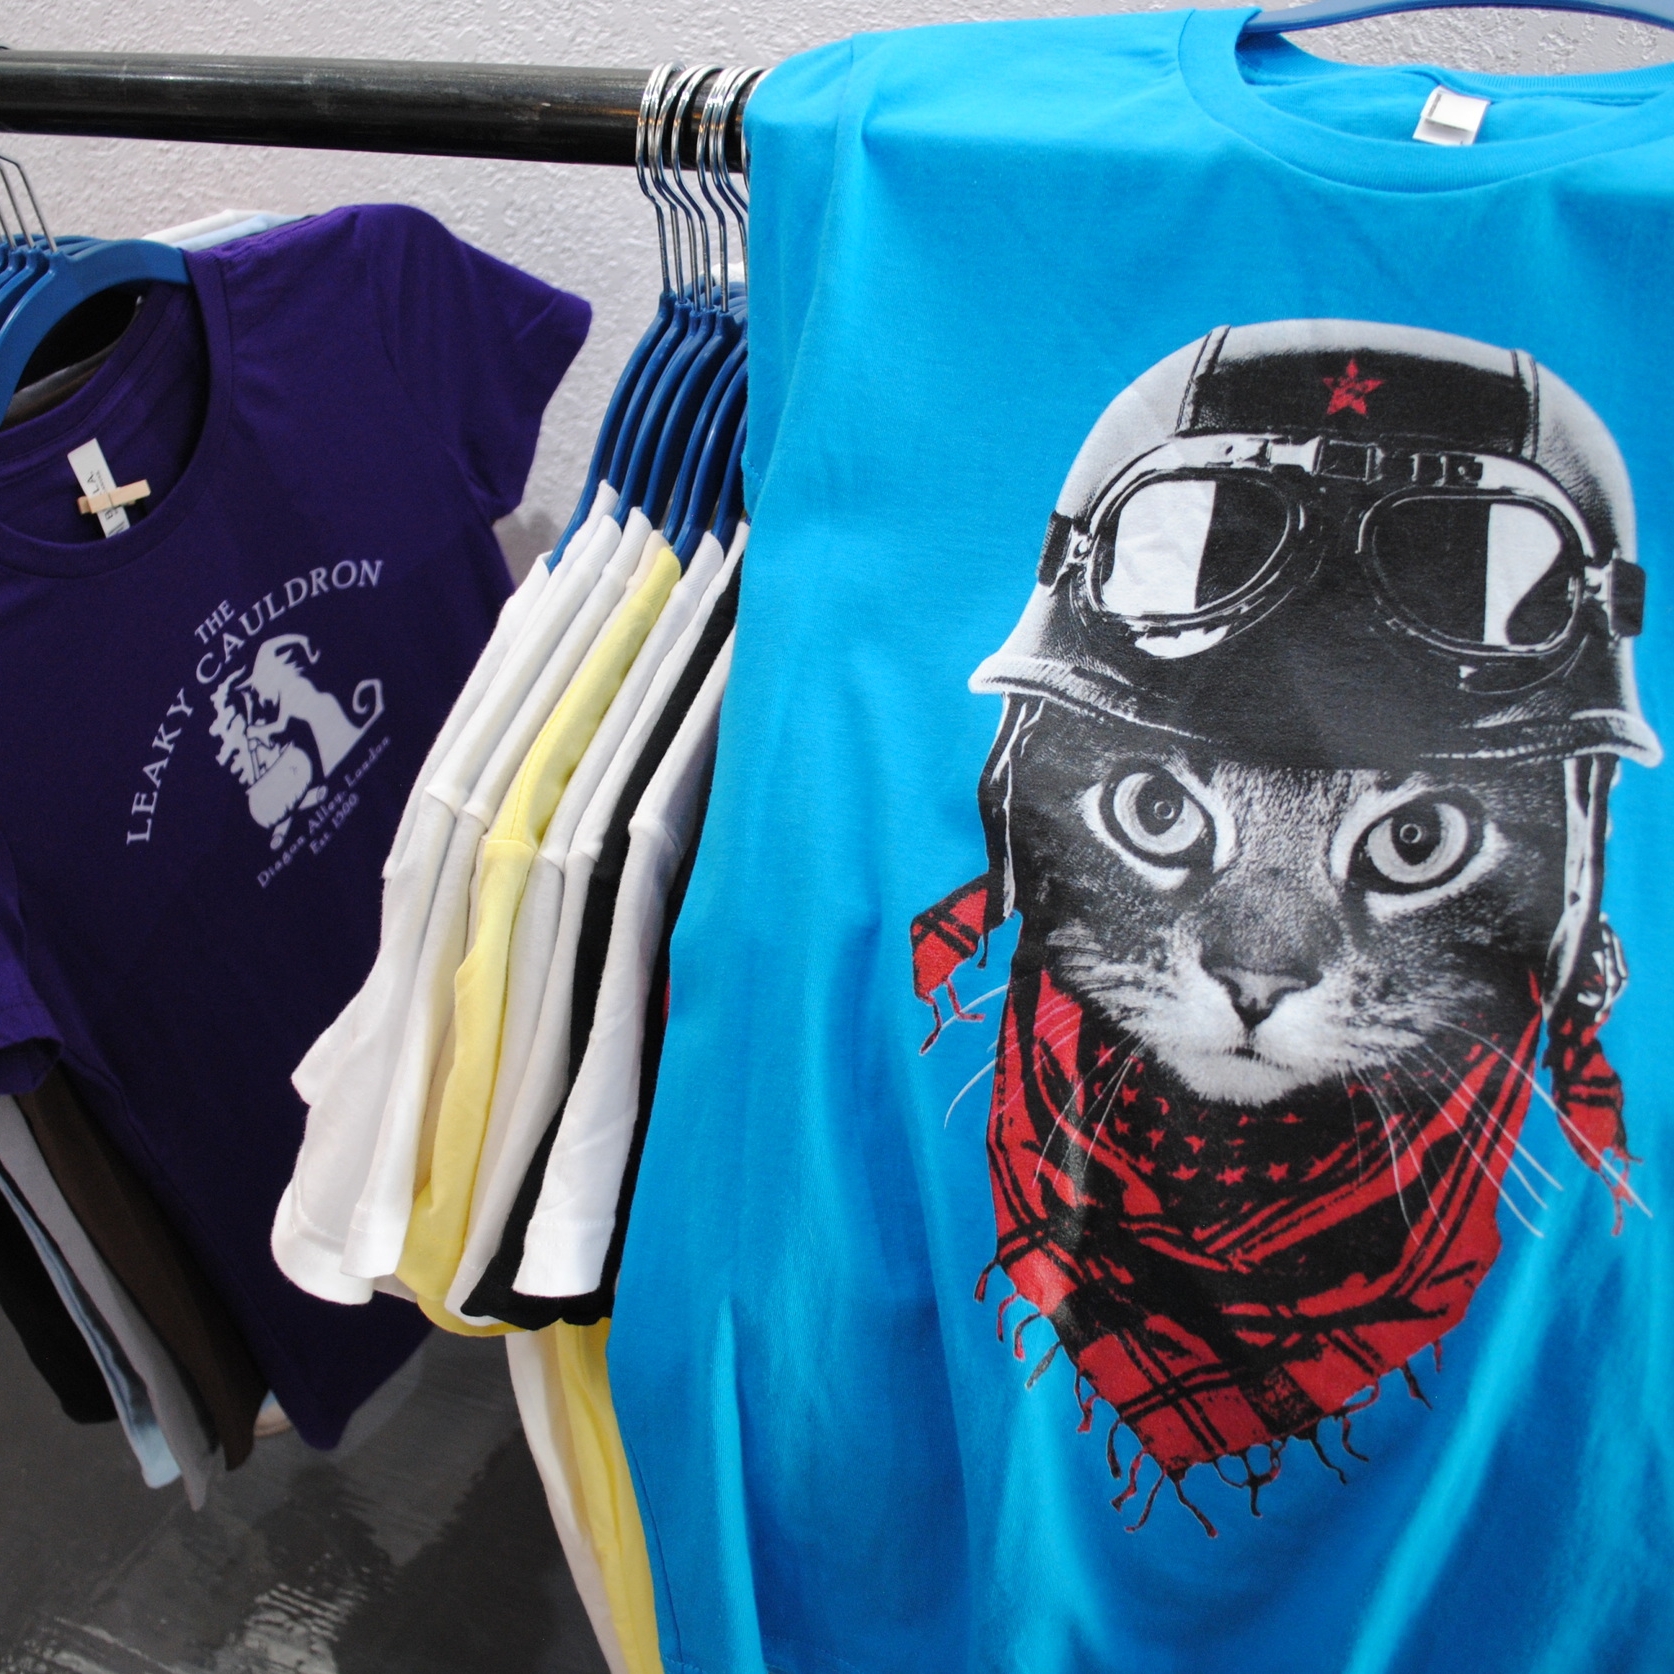 Biker Kitty shirt at The Prints and the Paper in Edmonton on 124 street